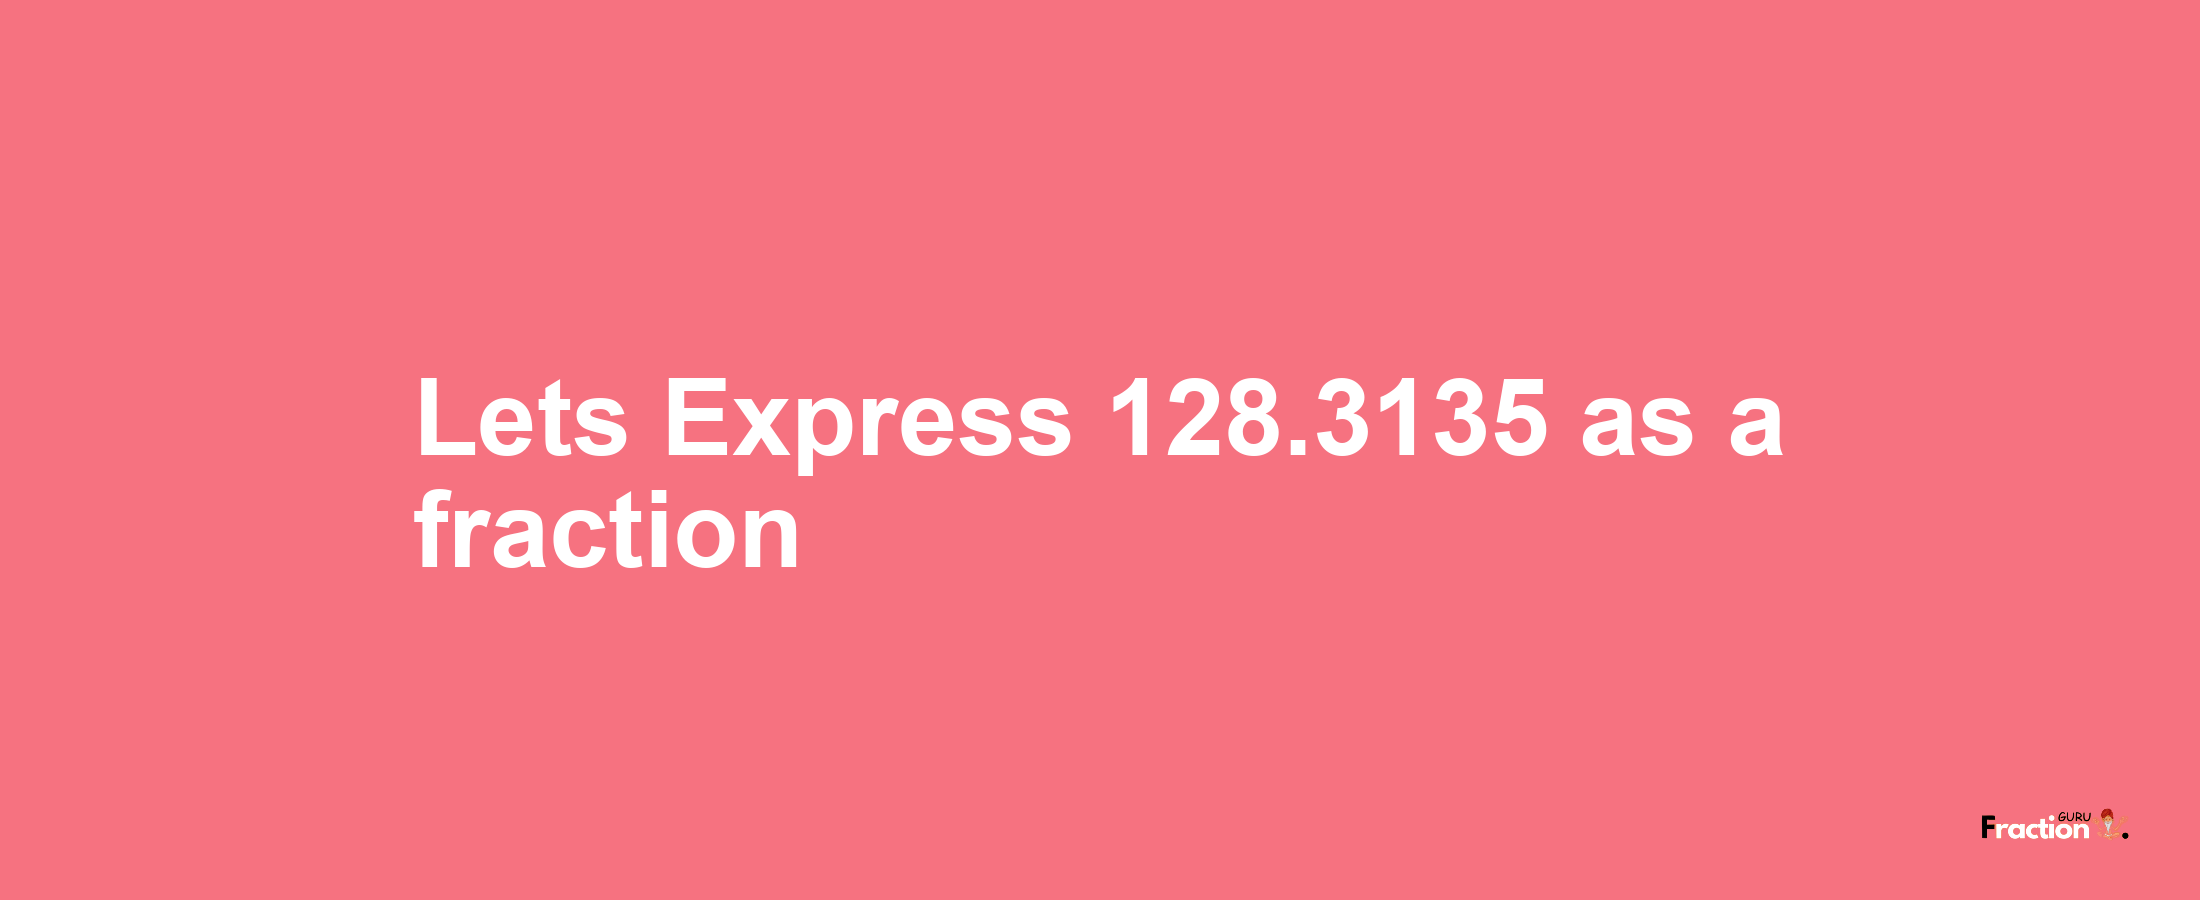 Lets Express 128.3135 as afraction